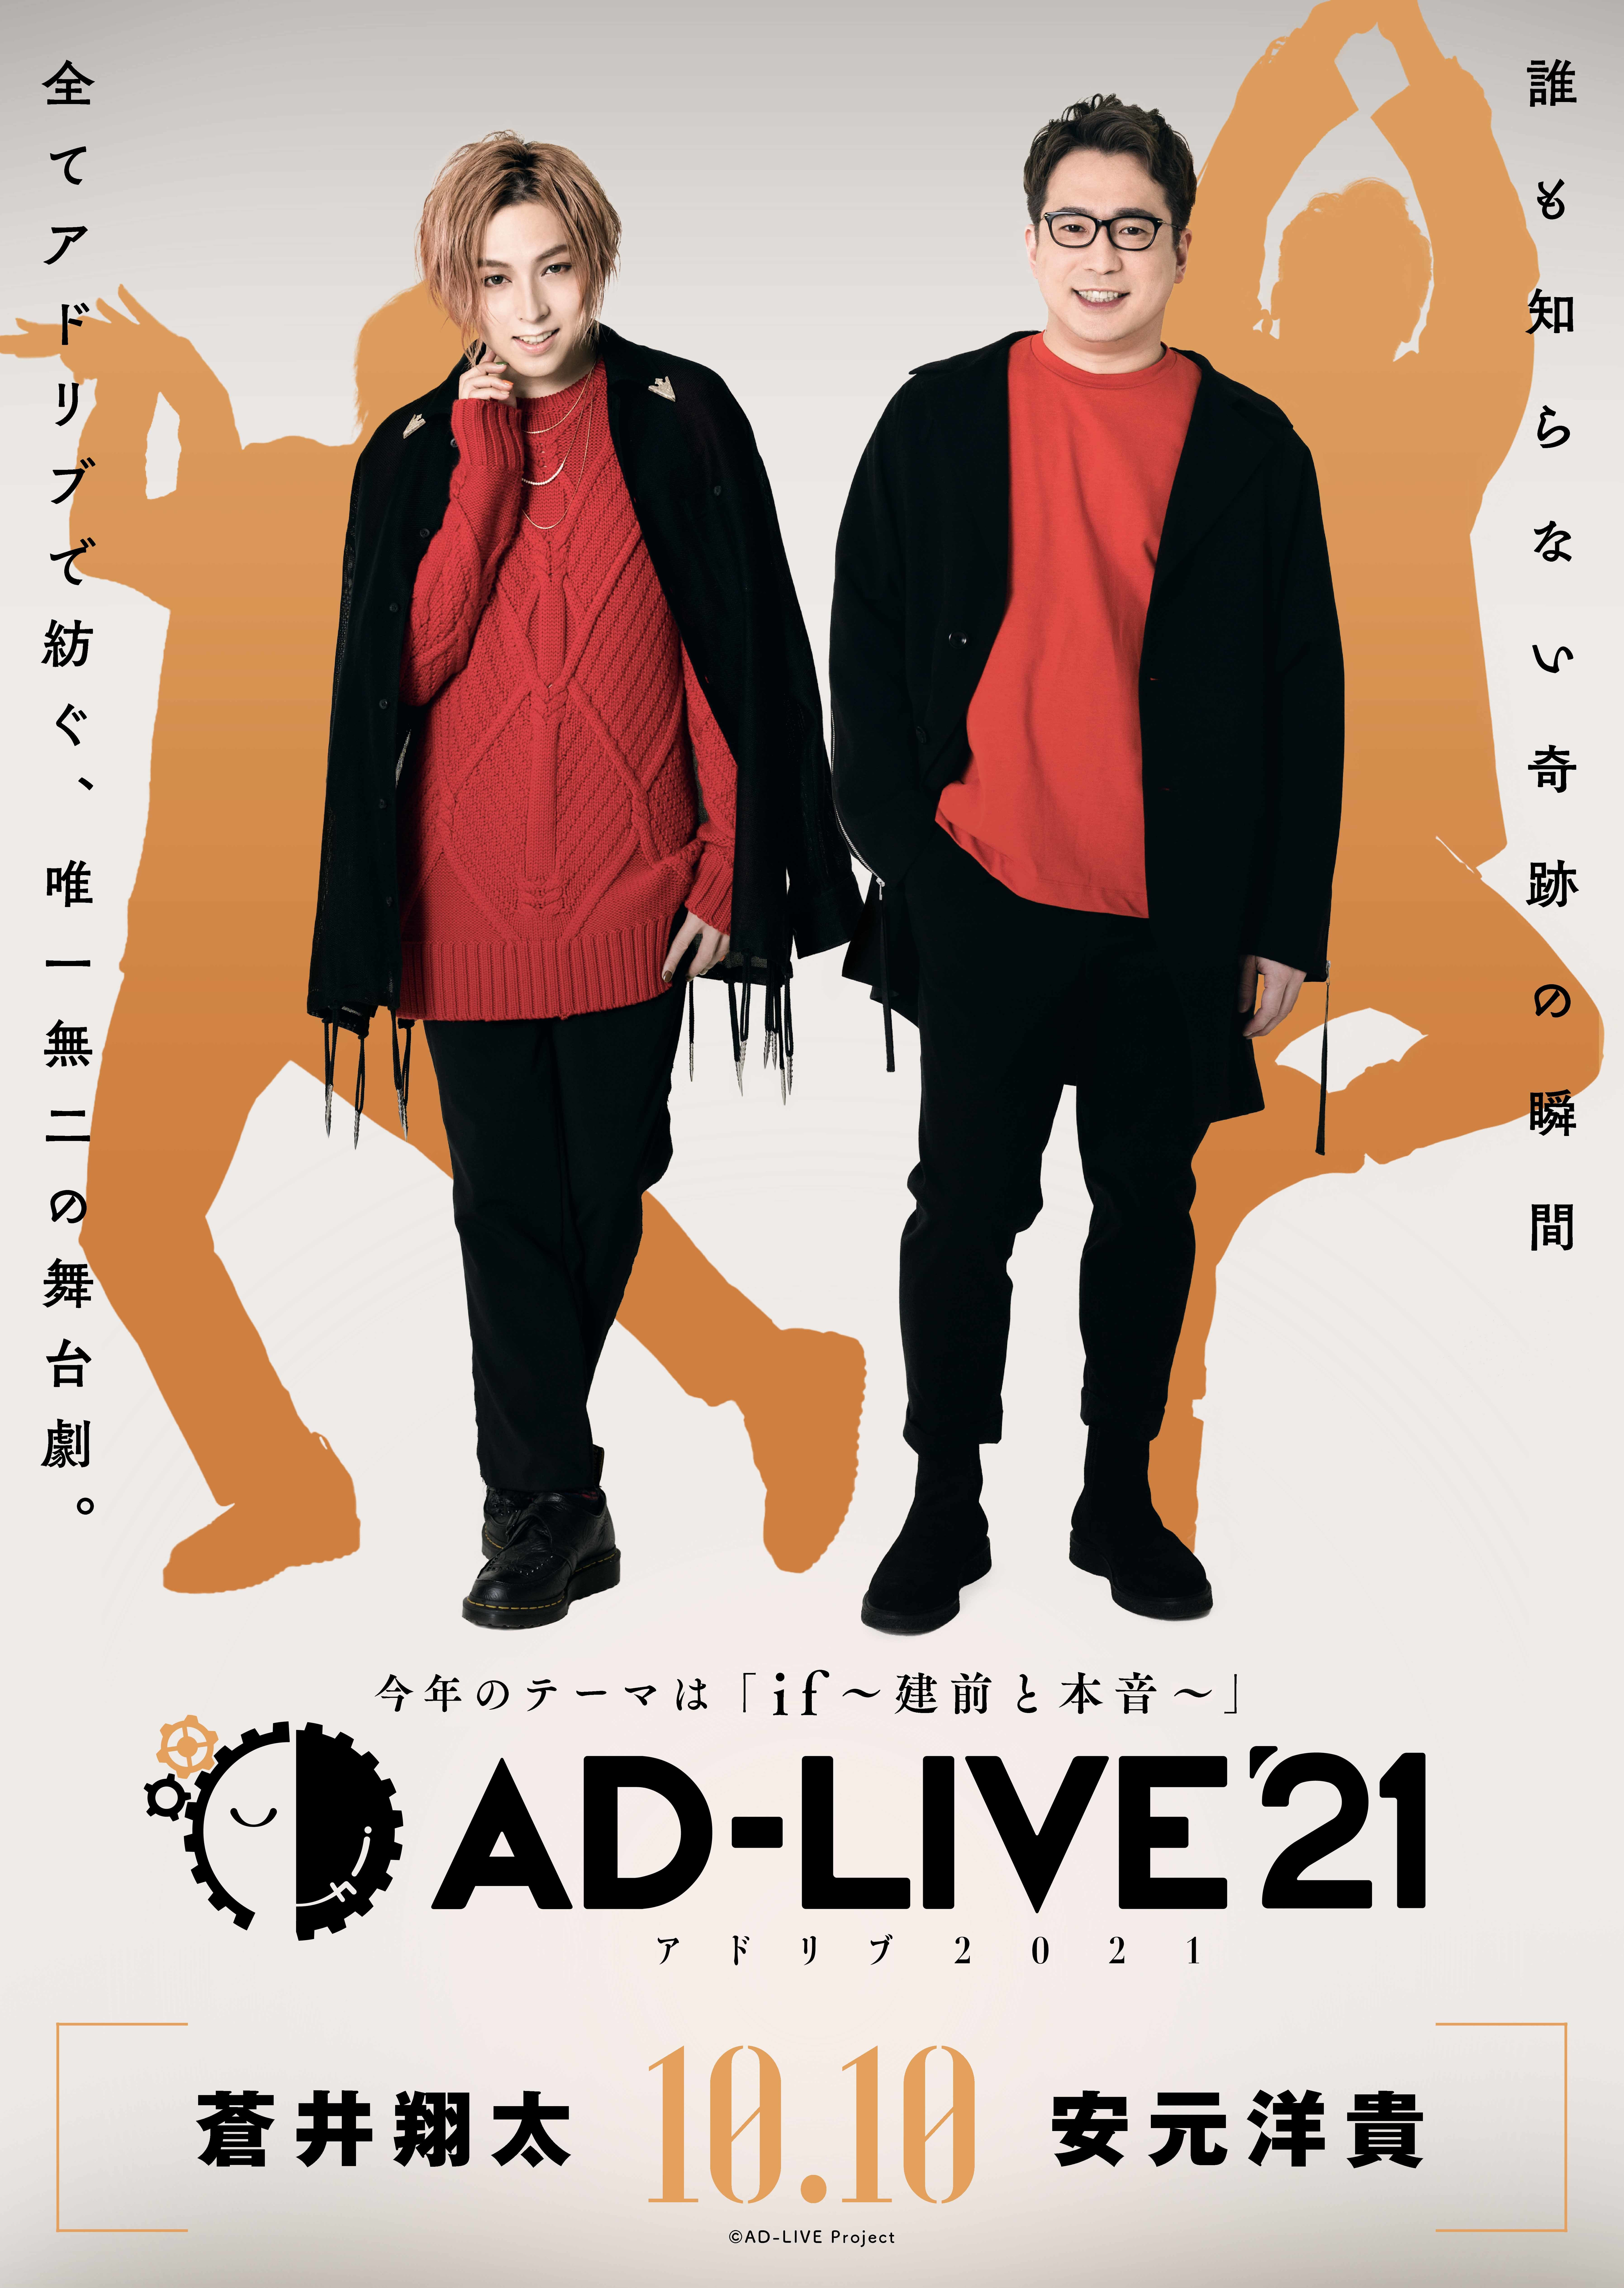 (C) AD-LIVE Project